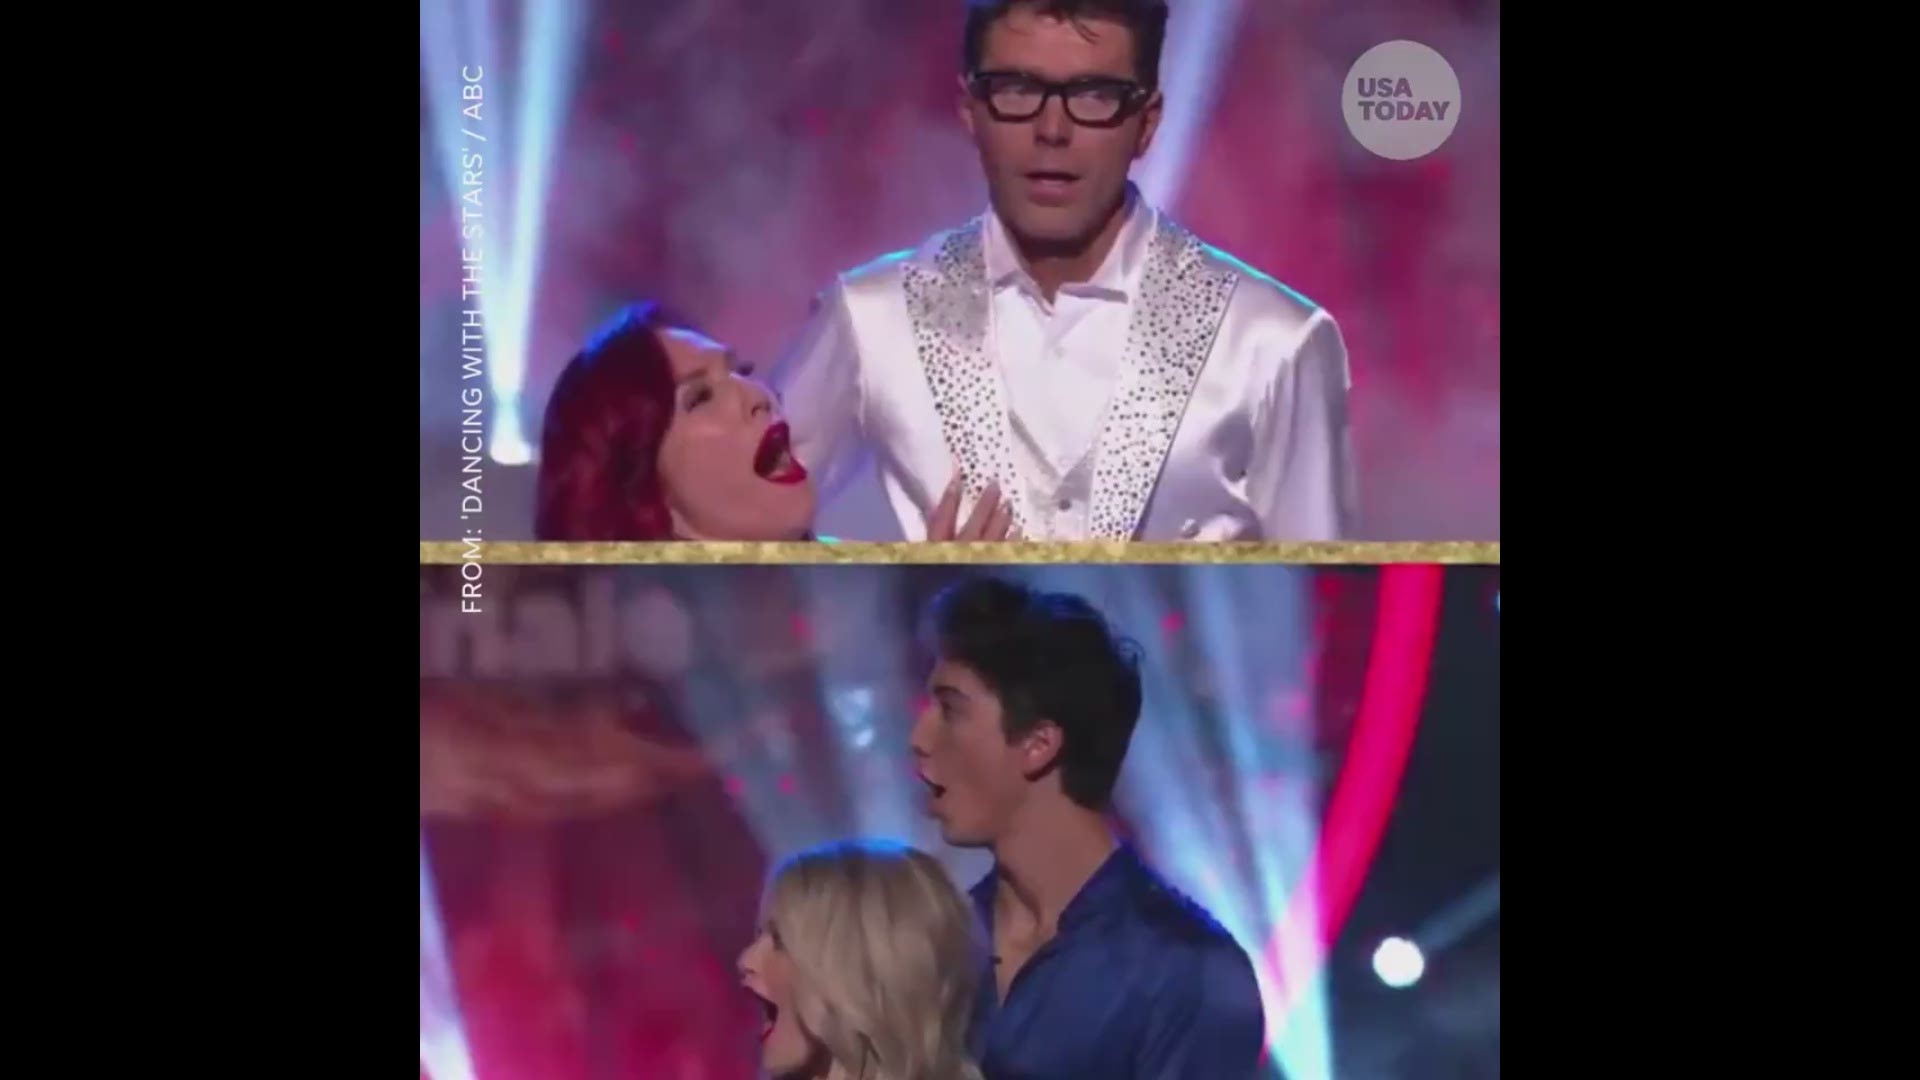 Country radio host Bobby Bones and professional dancer Sharna Burgess were crowned the winners "Dancing With the Stars" season 27. USA TODAY